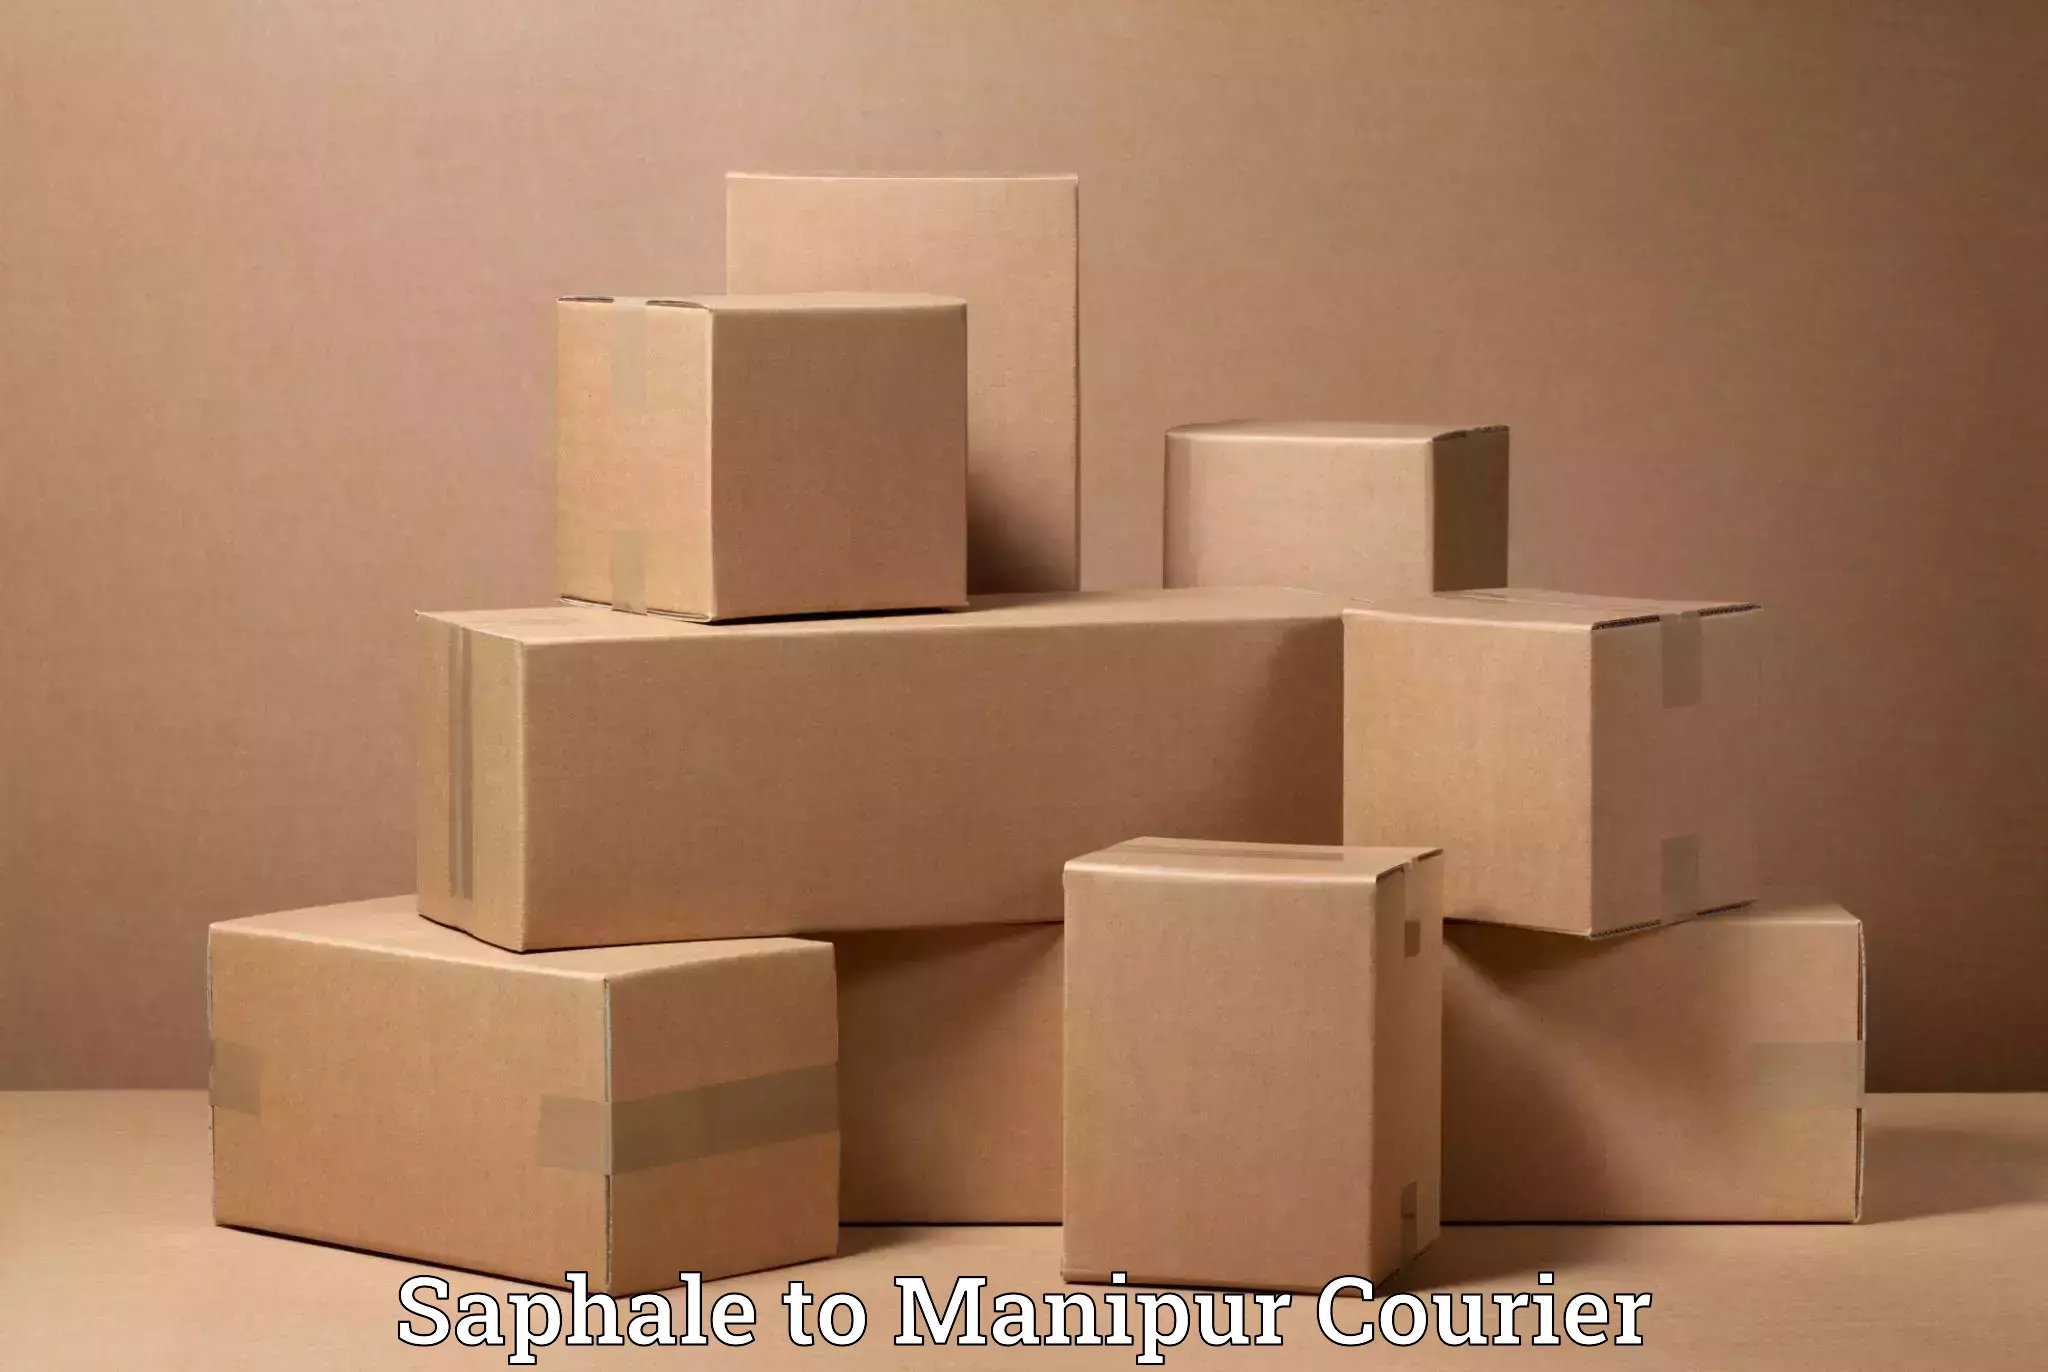 Furniture relocation experts Saphale to Manipur